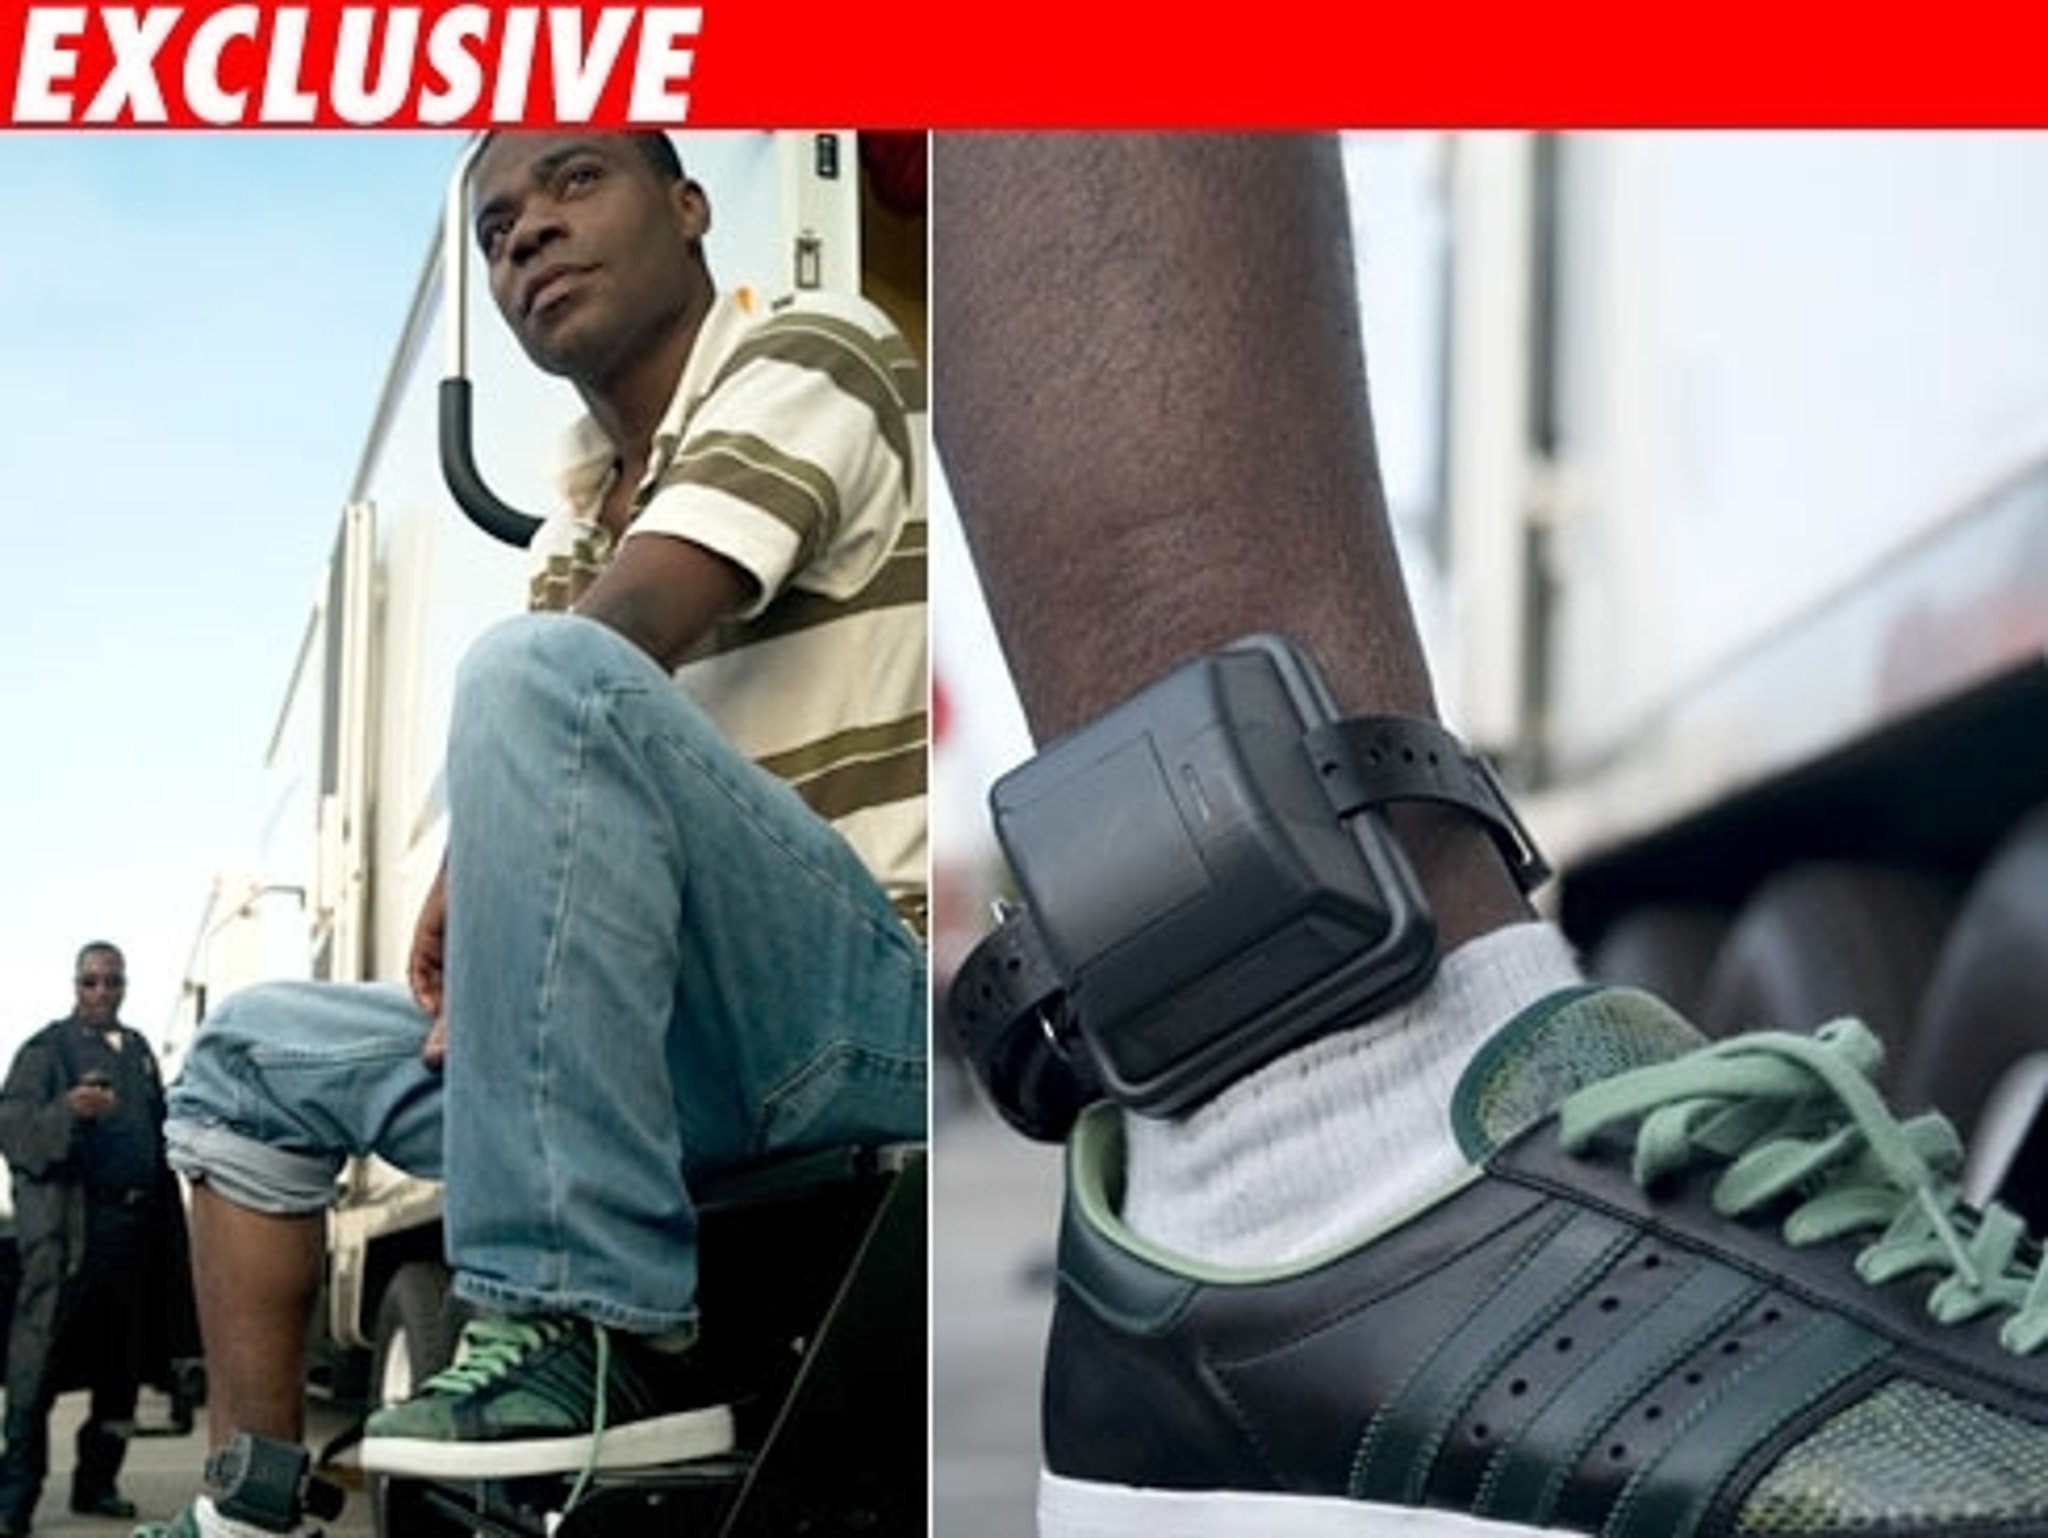 Gucci Leather Anklet Criticized for Its Resemblance to an Ankle Monitor